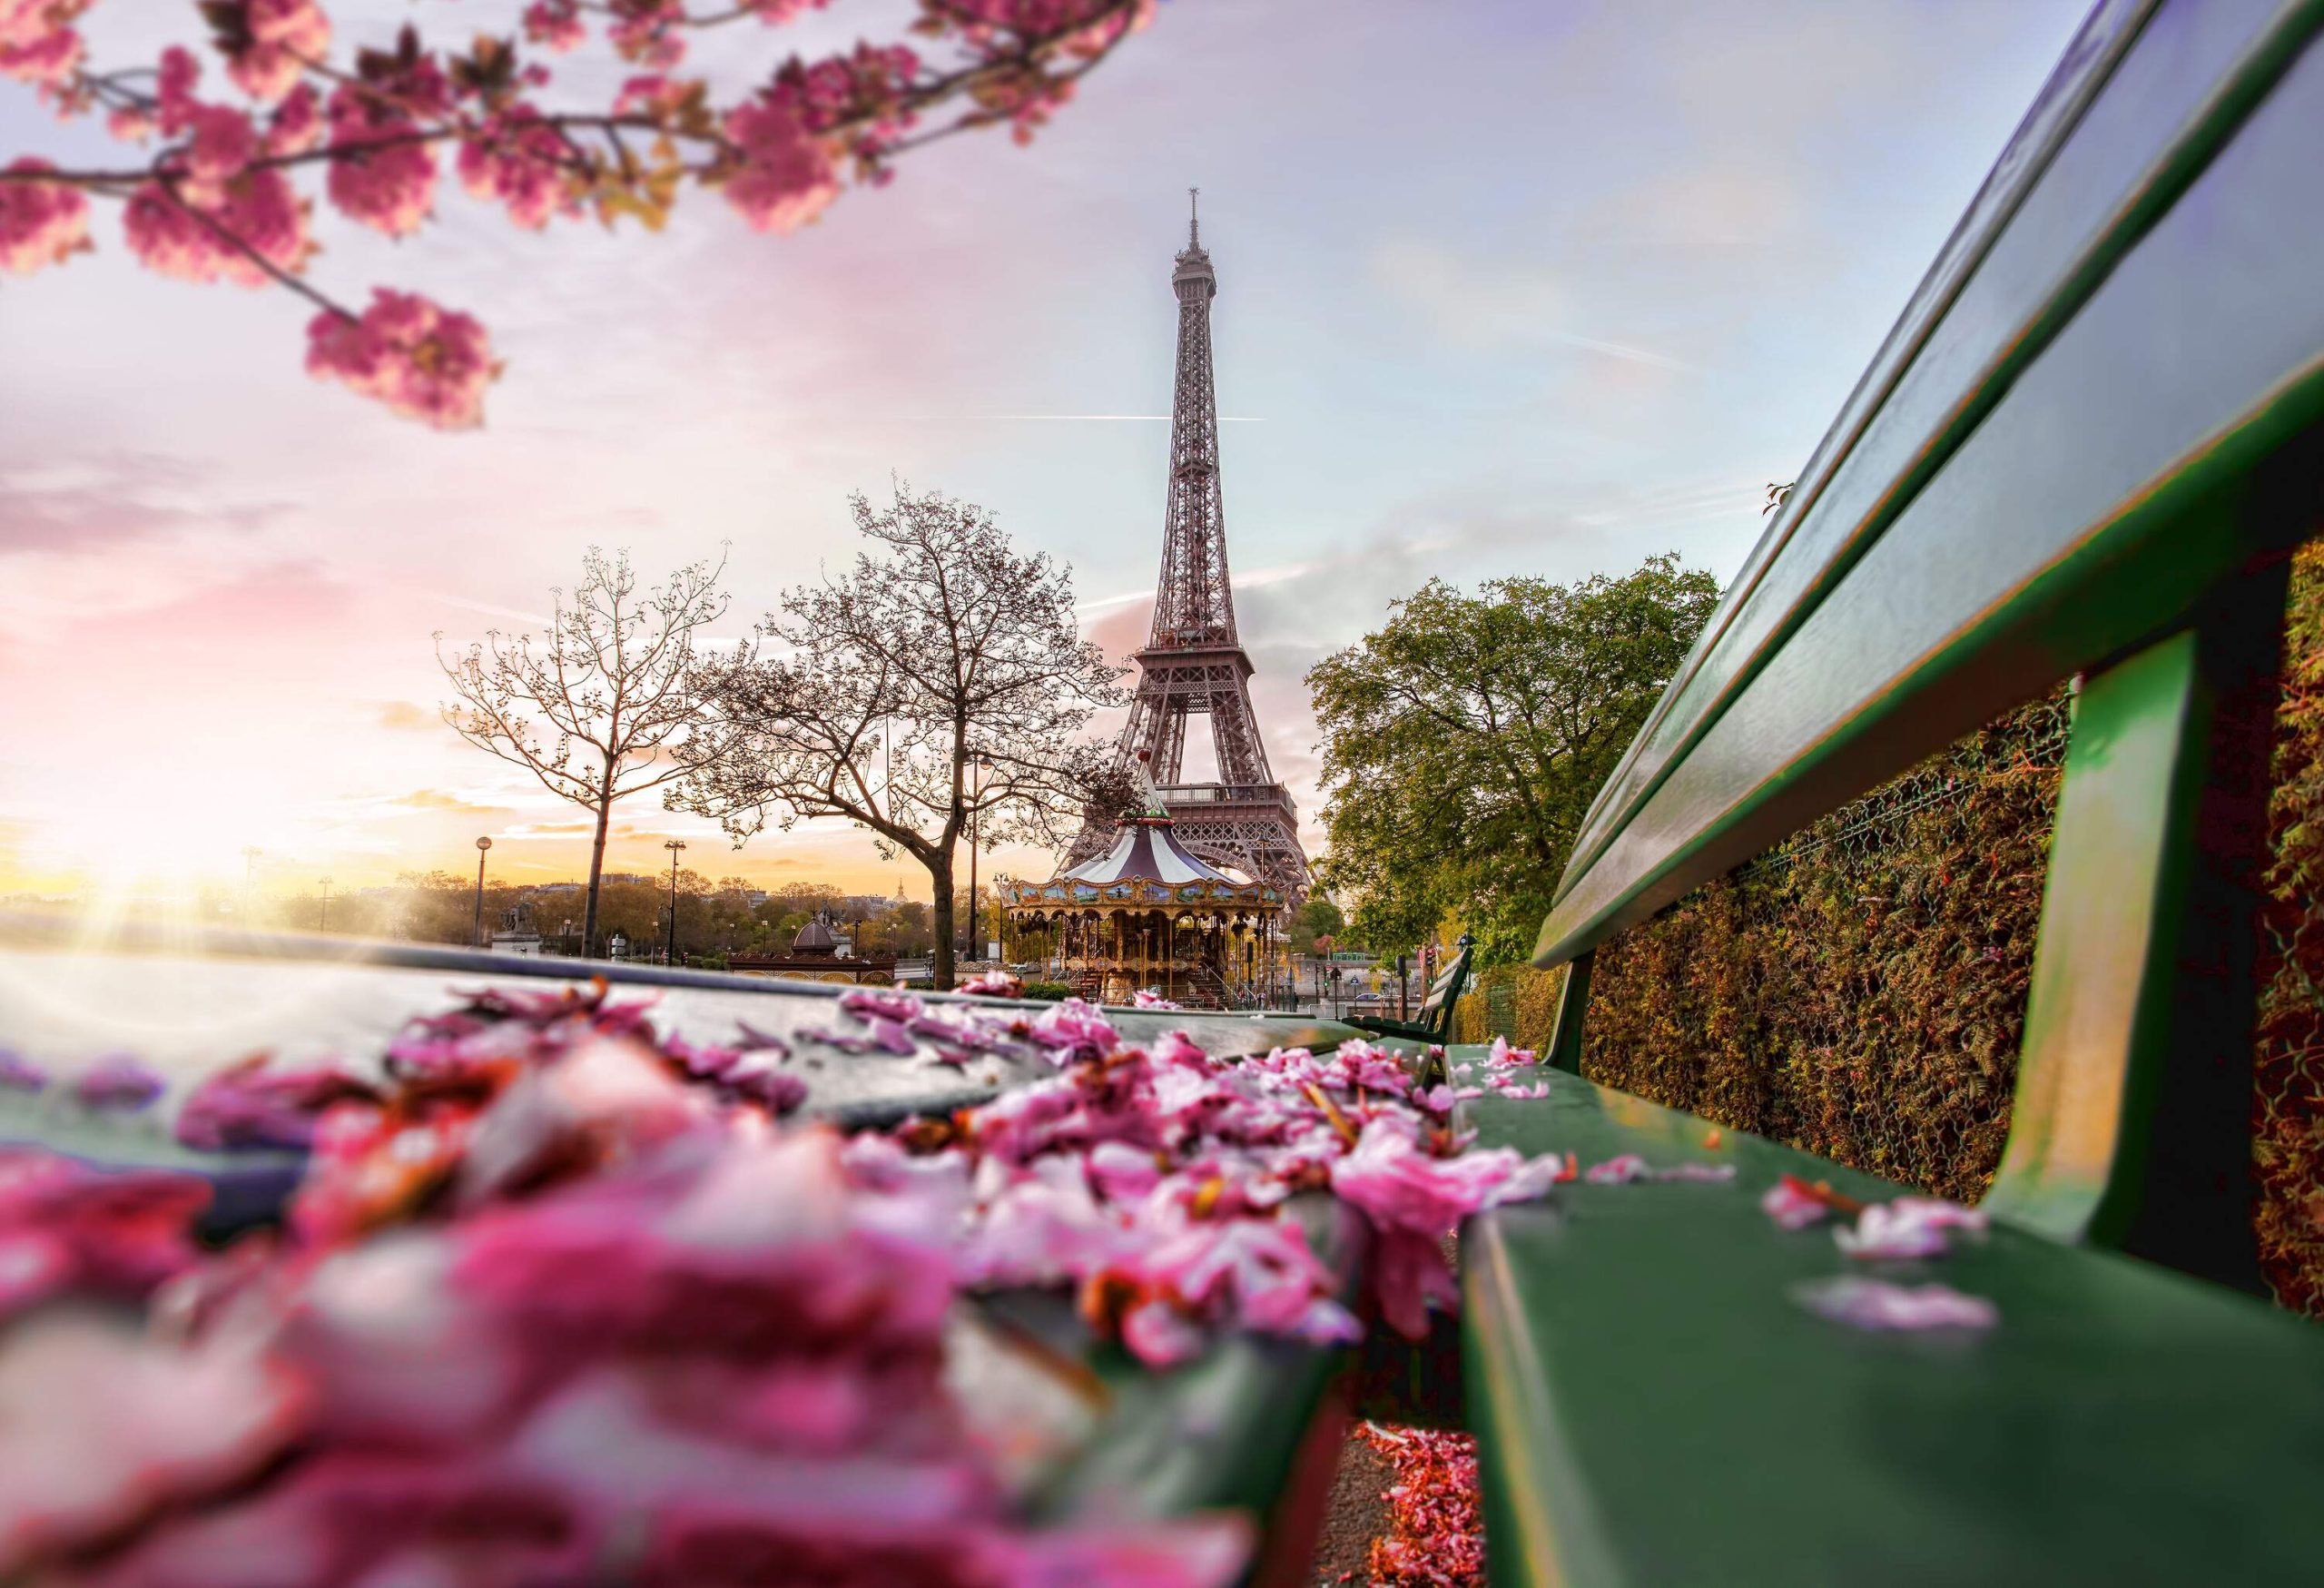 A view of the Eiffel Tower behind a Ferris wheel surrounded by trees in spring.